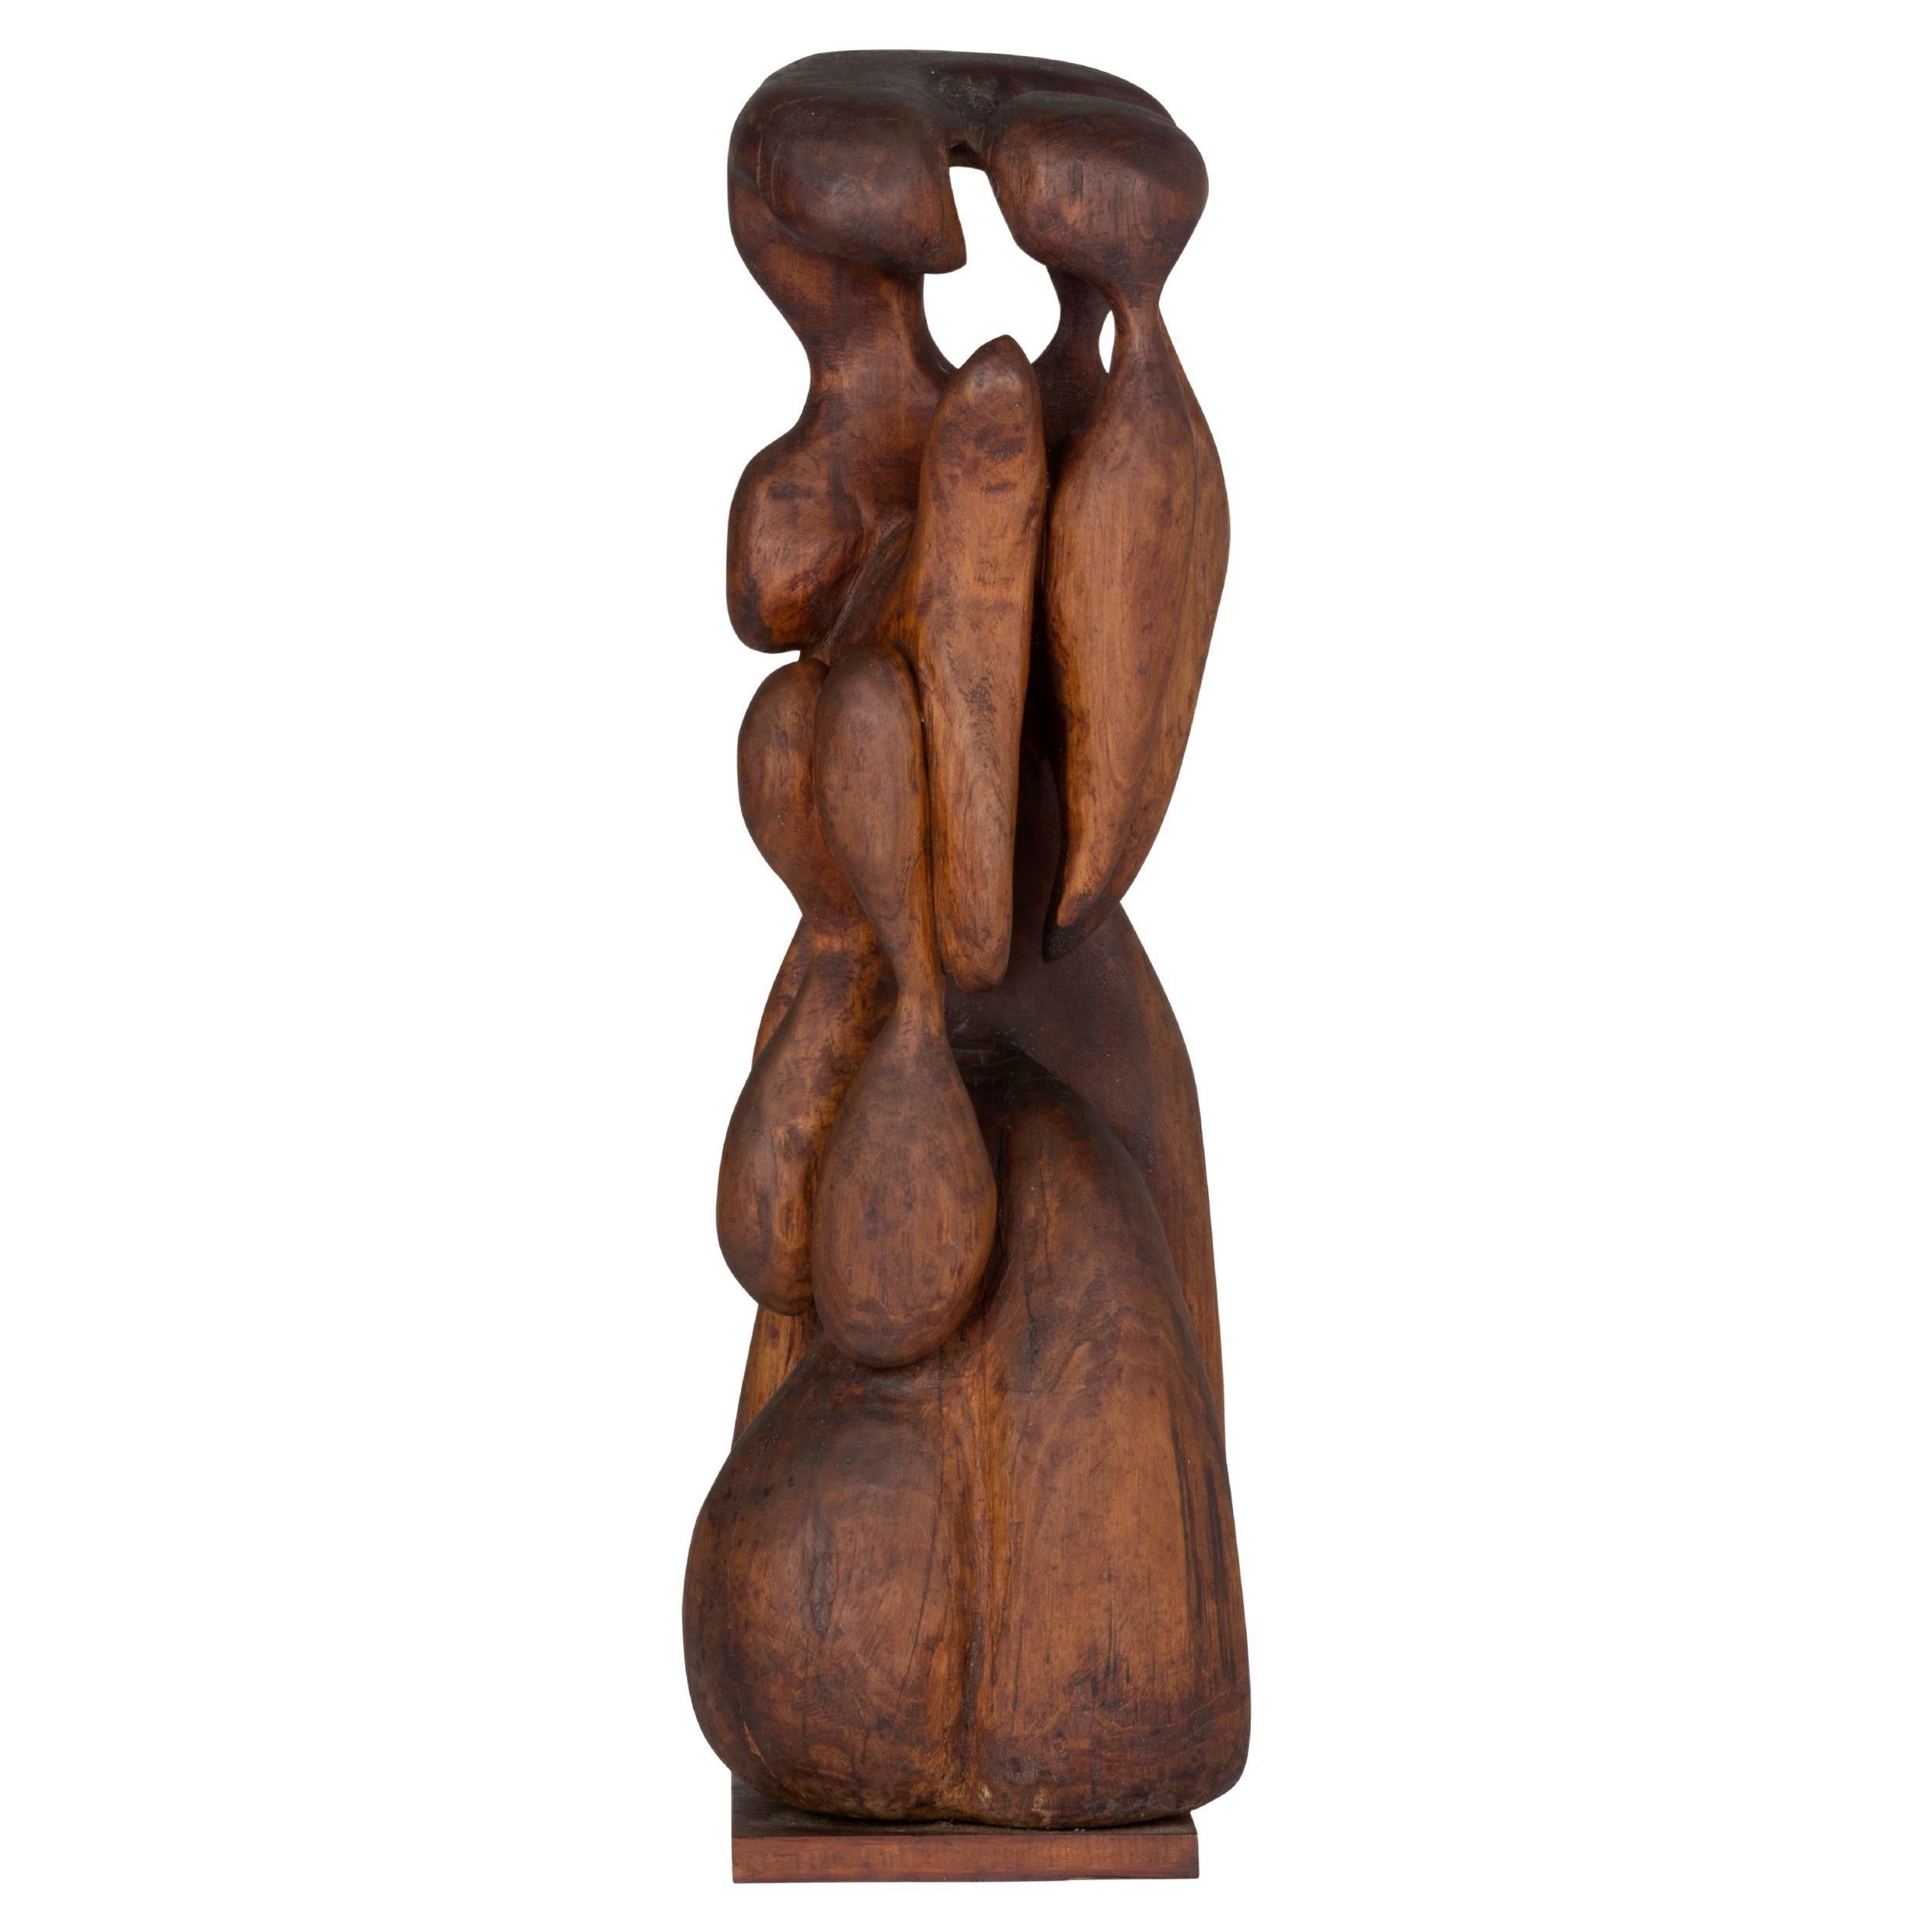 Biomorphic Wood Sculpture by Wendell Upchurch